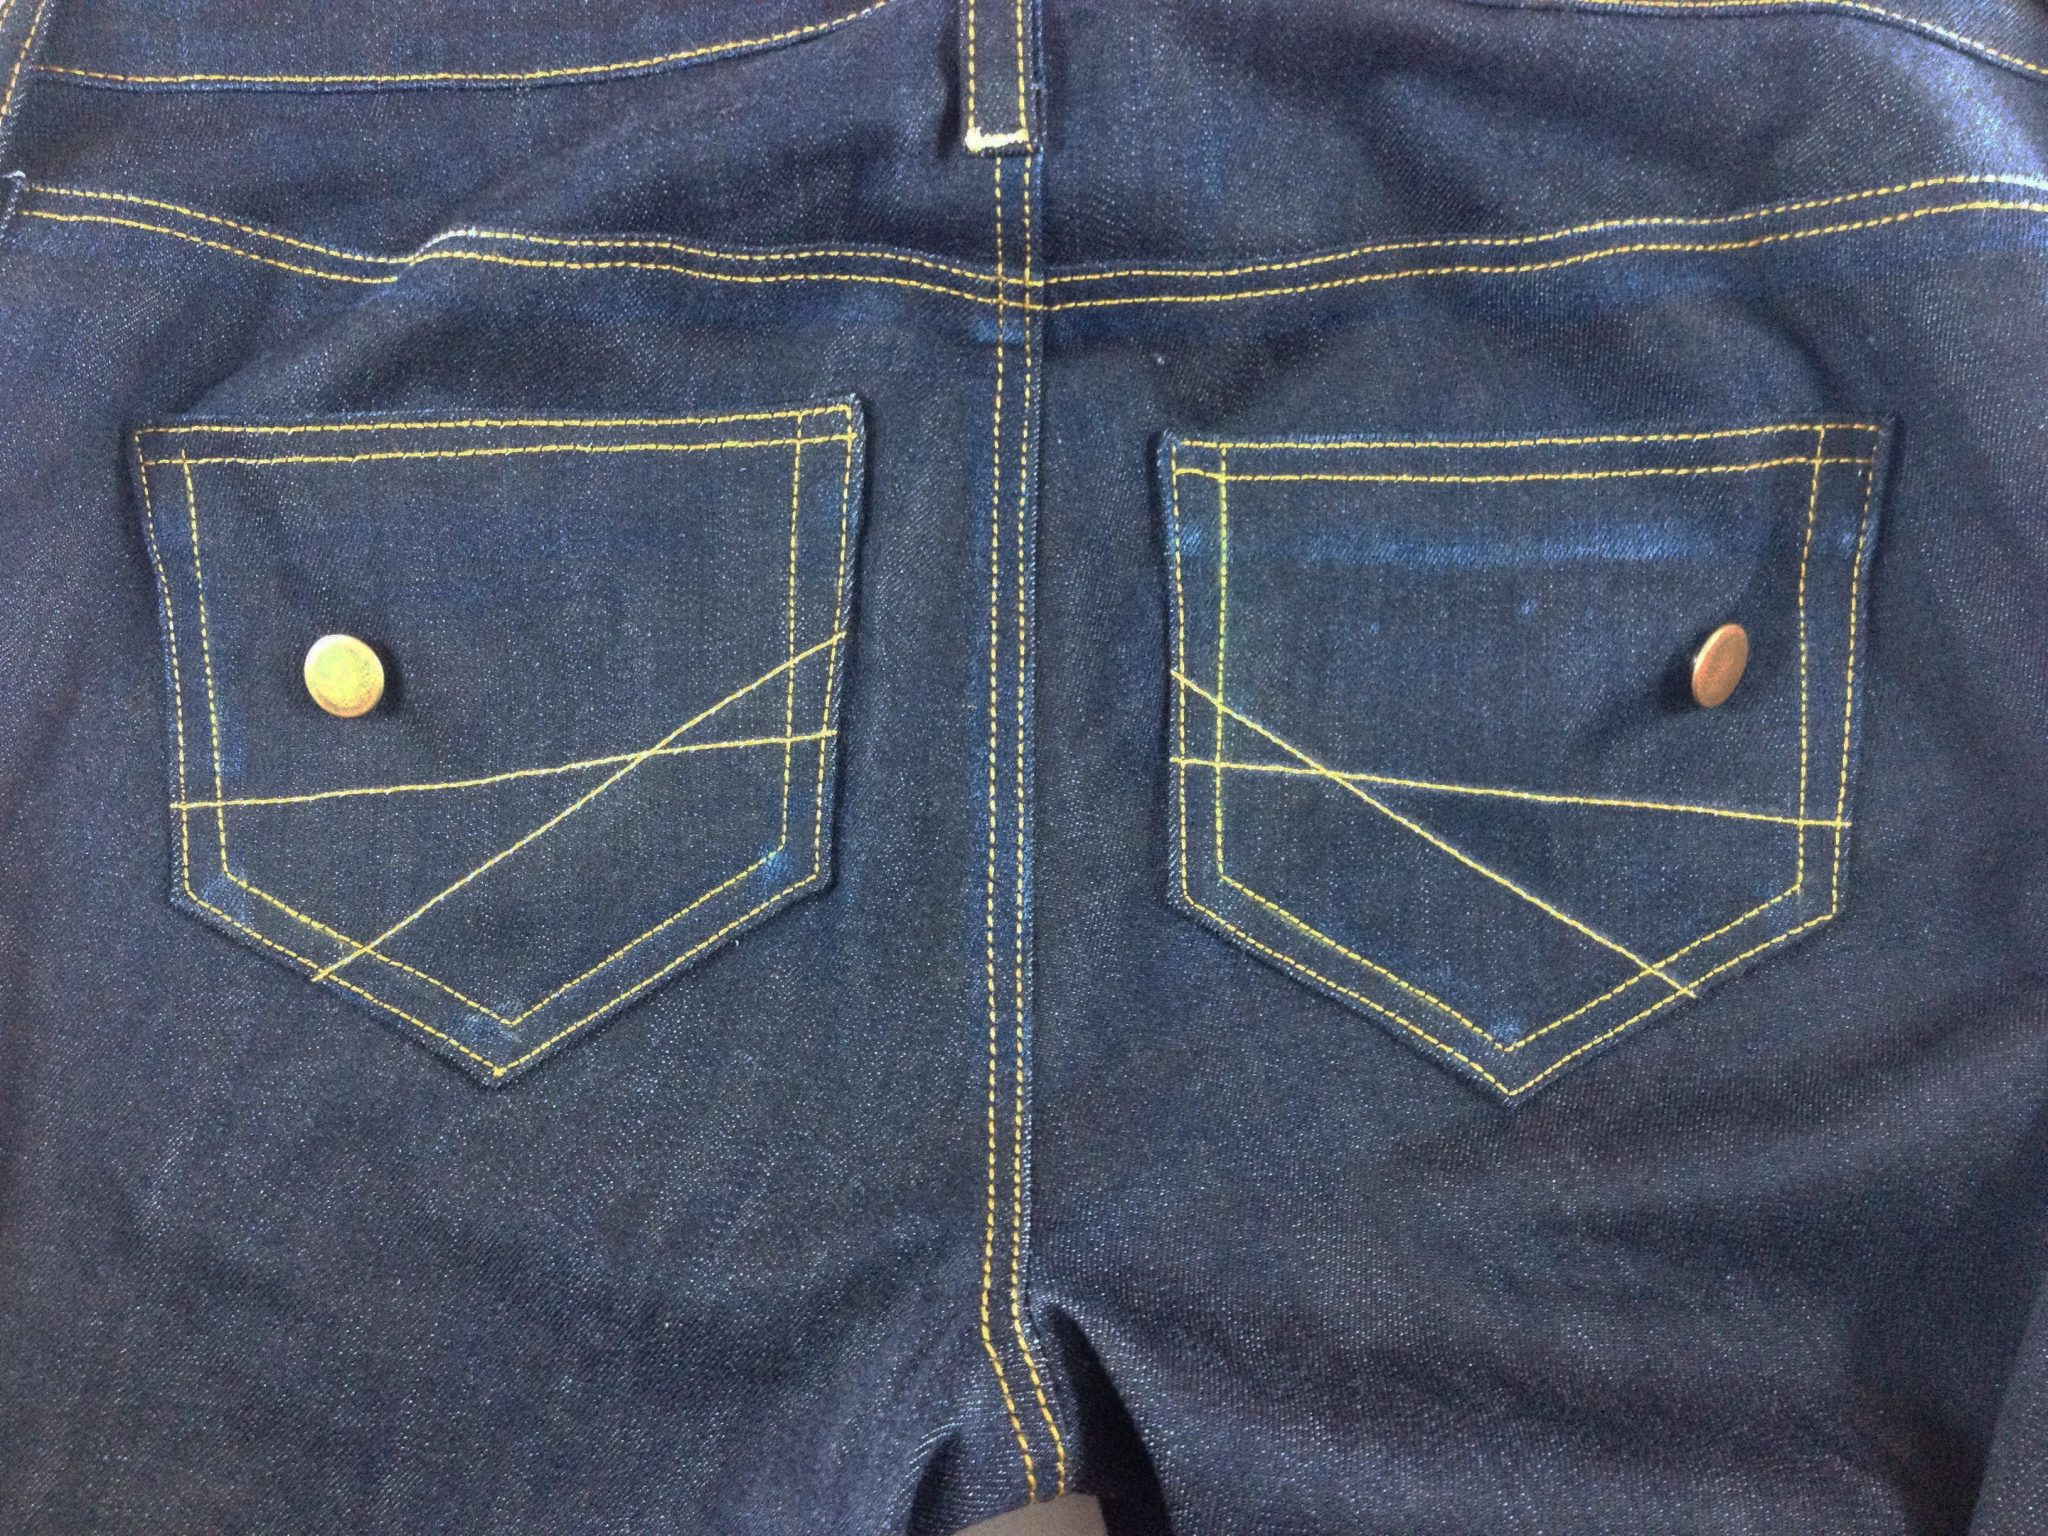 Liana Jeans Sew Along: Day 10 – Hemming and Finishing | Itch to Stitch